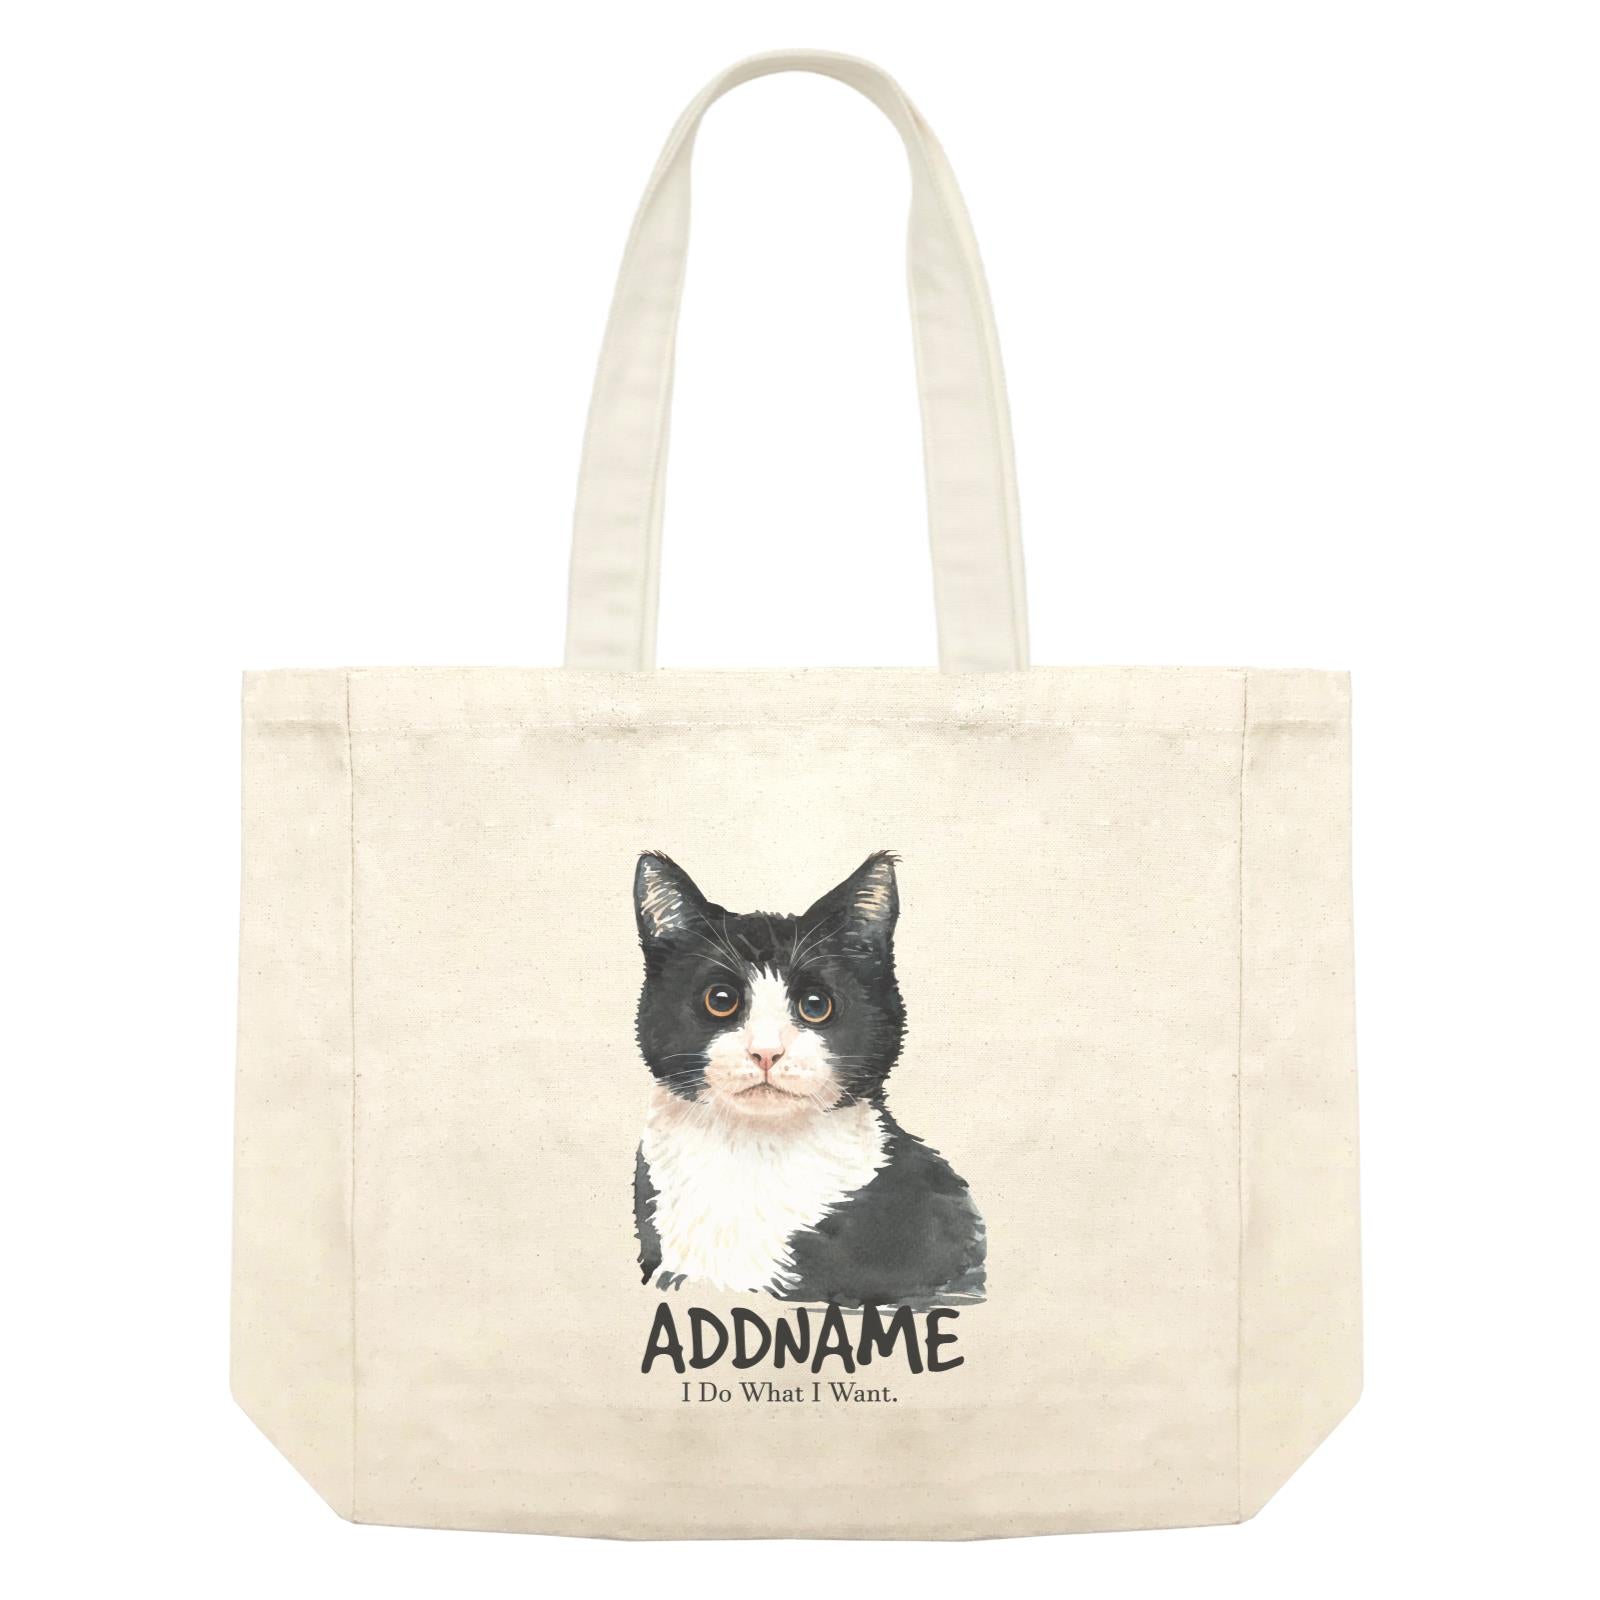 Watercolor Cat Black & White Cat I Do What I Want Addname Shopping Bag